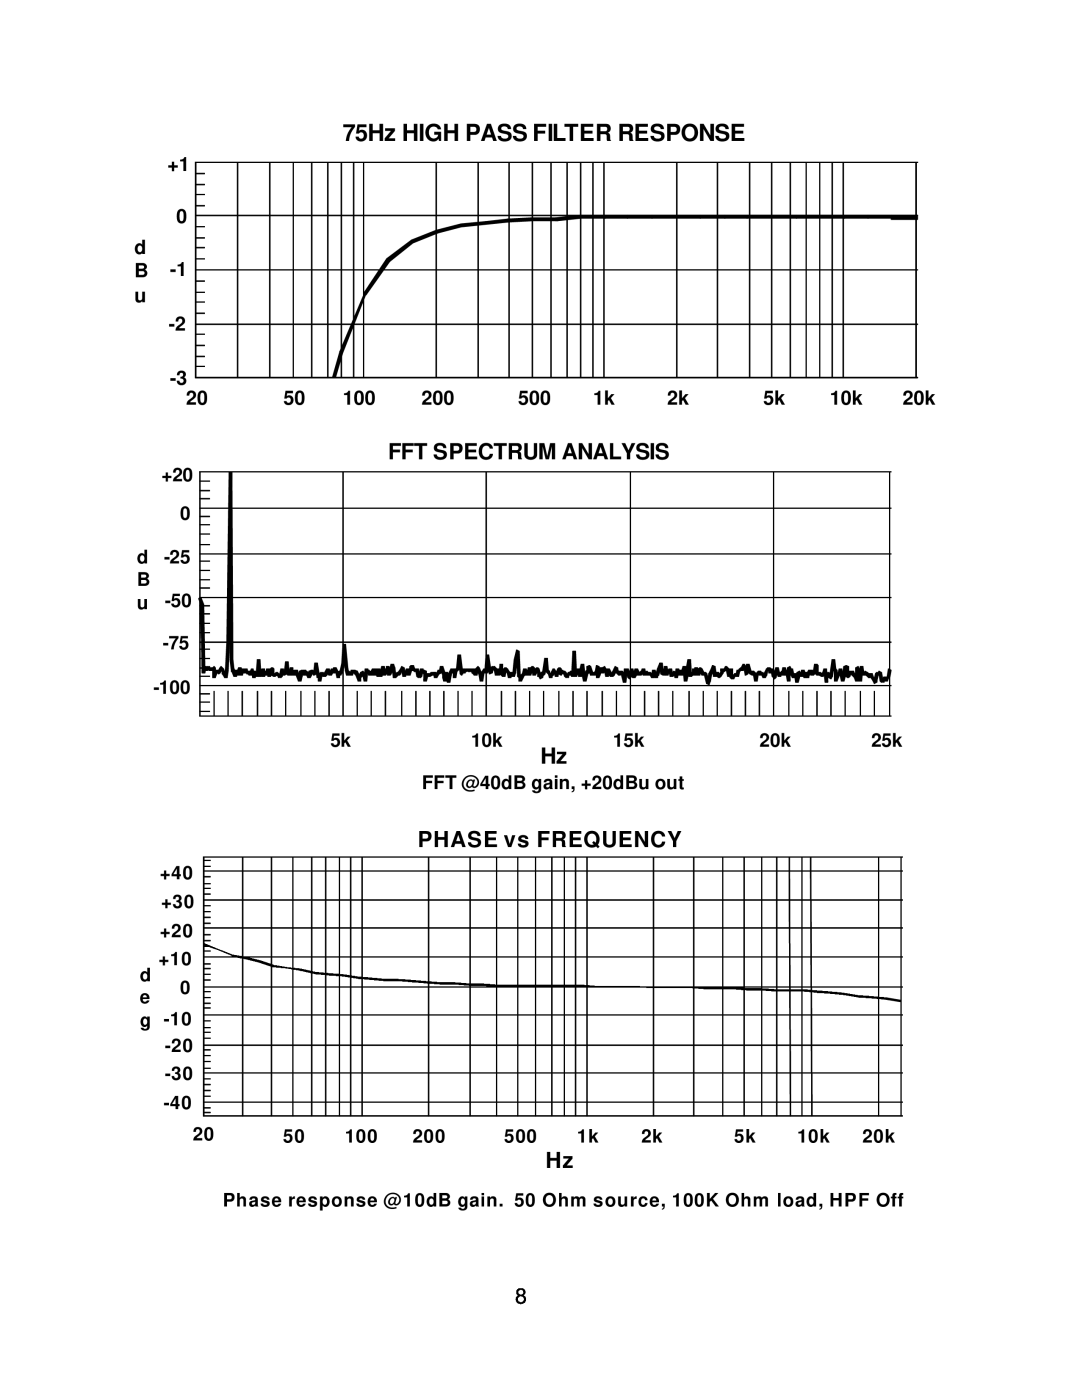 Boulder Amplifiers 101 owner manual 75Hz HIGH PASS FILTER RESPONSE, Fft Spectrum Analysis, PHASE vs FREQUENCY 